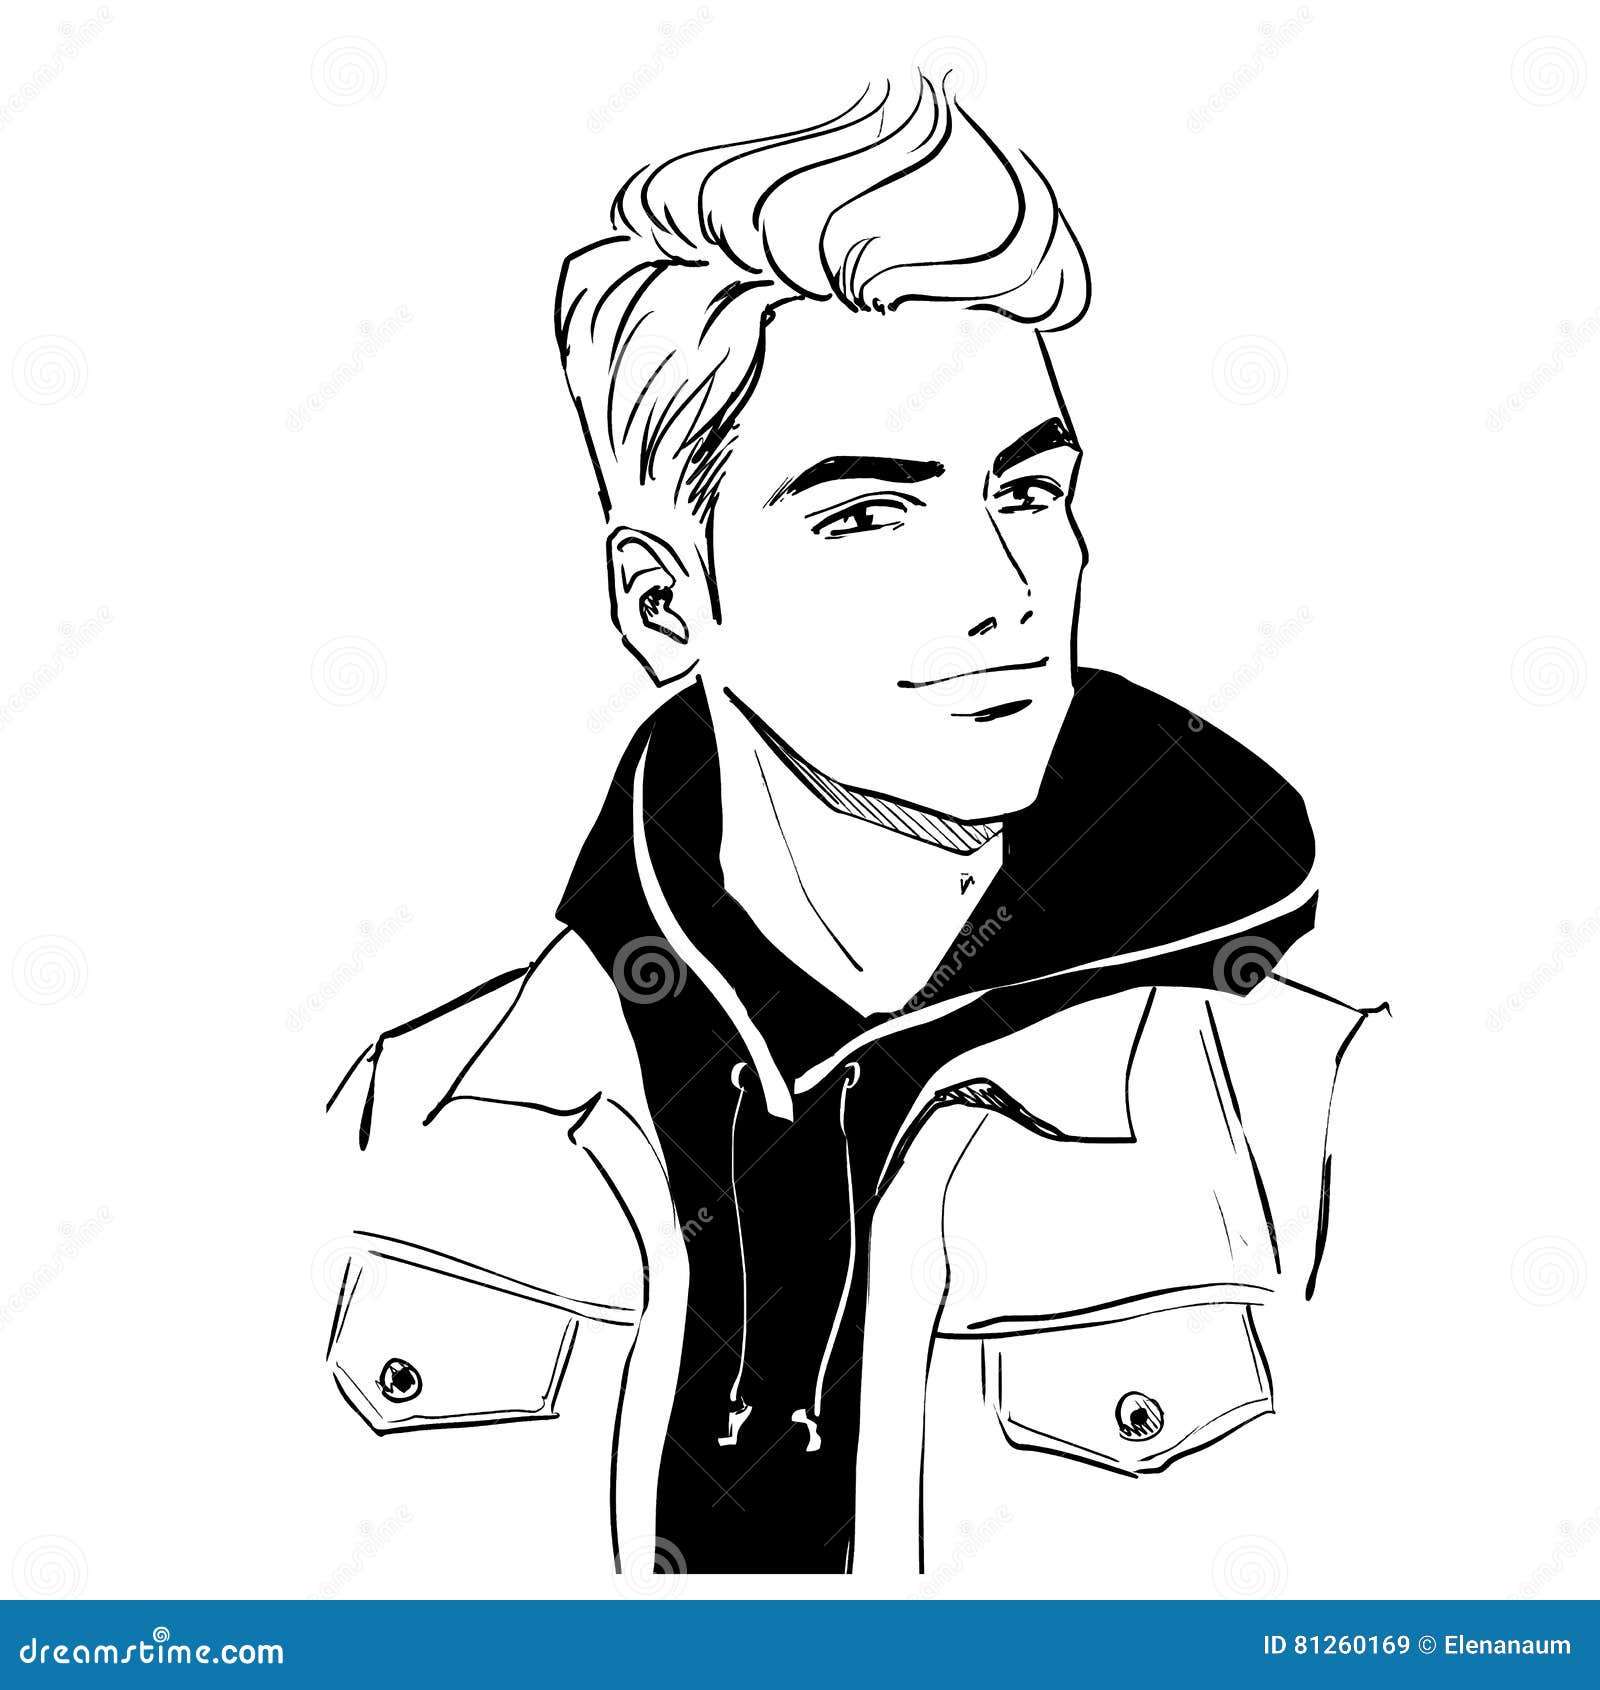 Banner Stylish Boy Sketch Style Text Stock Vector Royalty Free 1009291279   Shutterstock